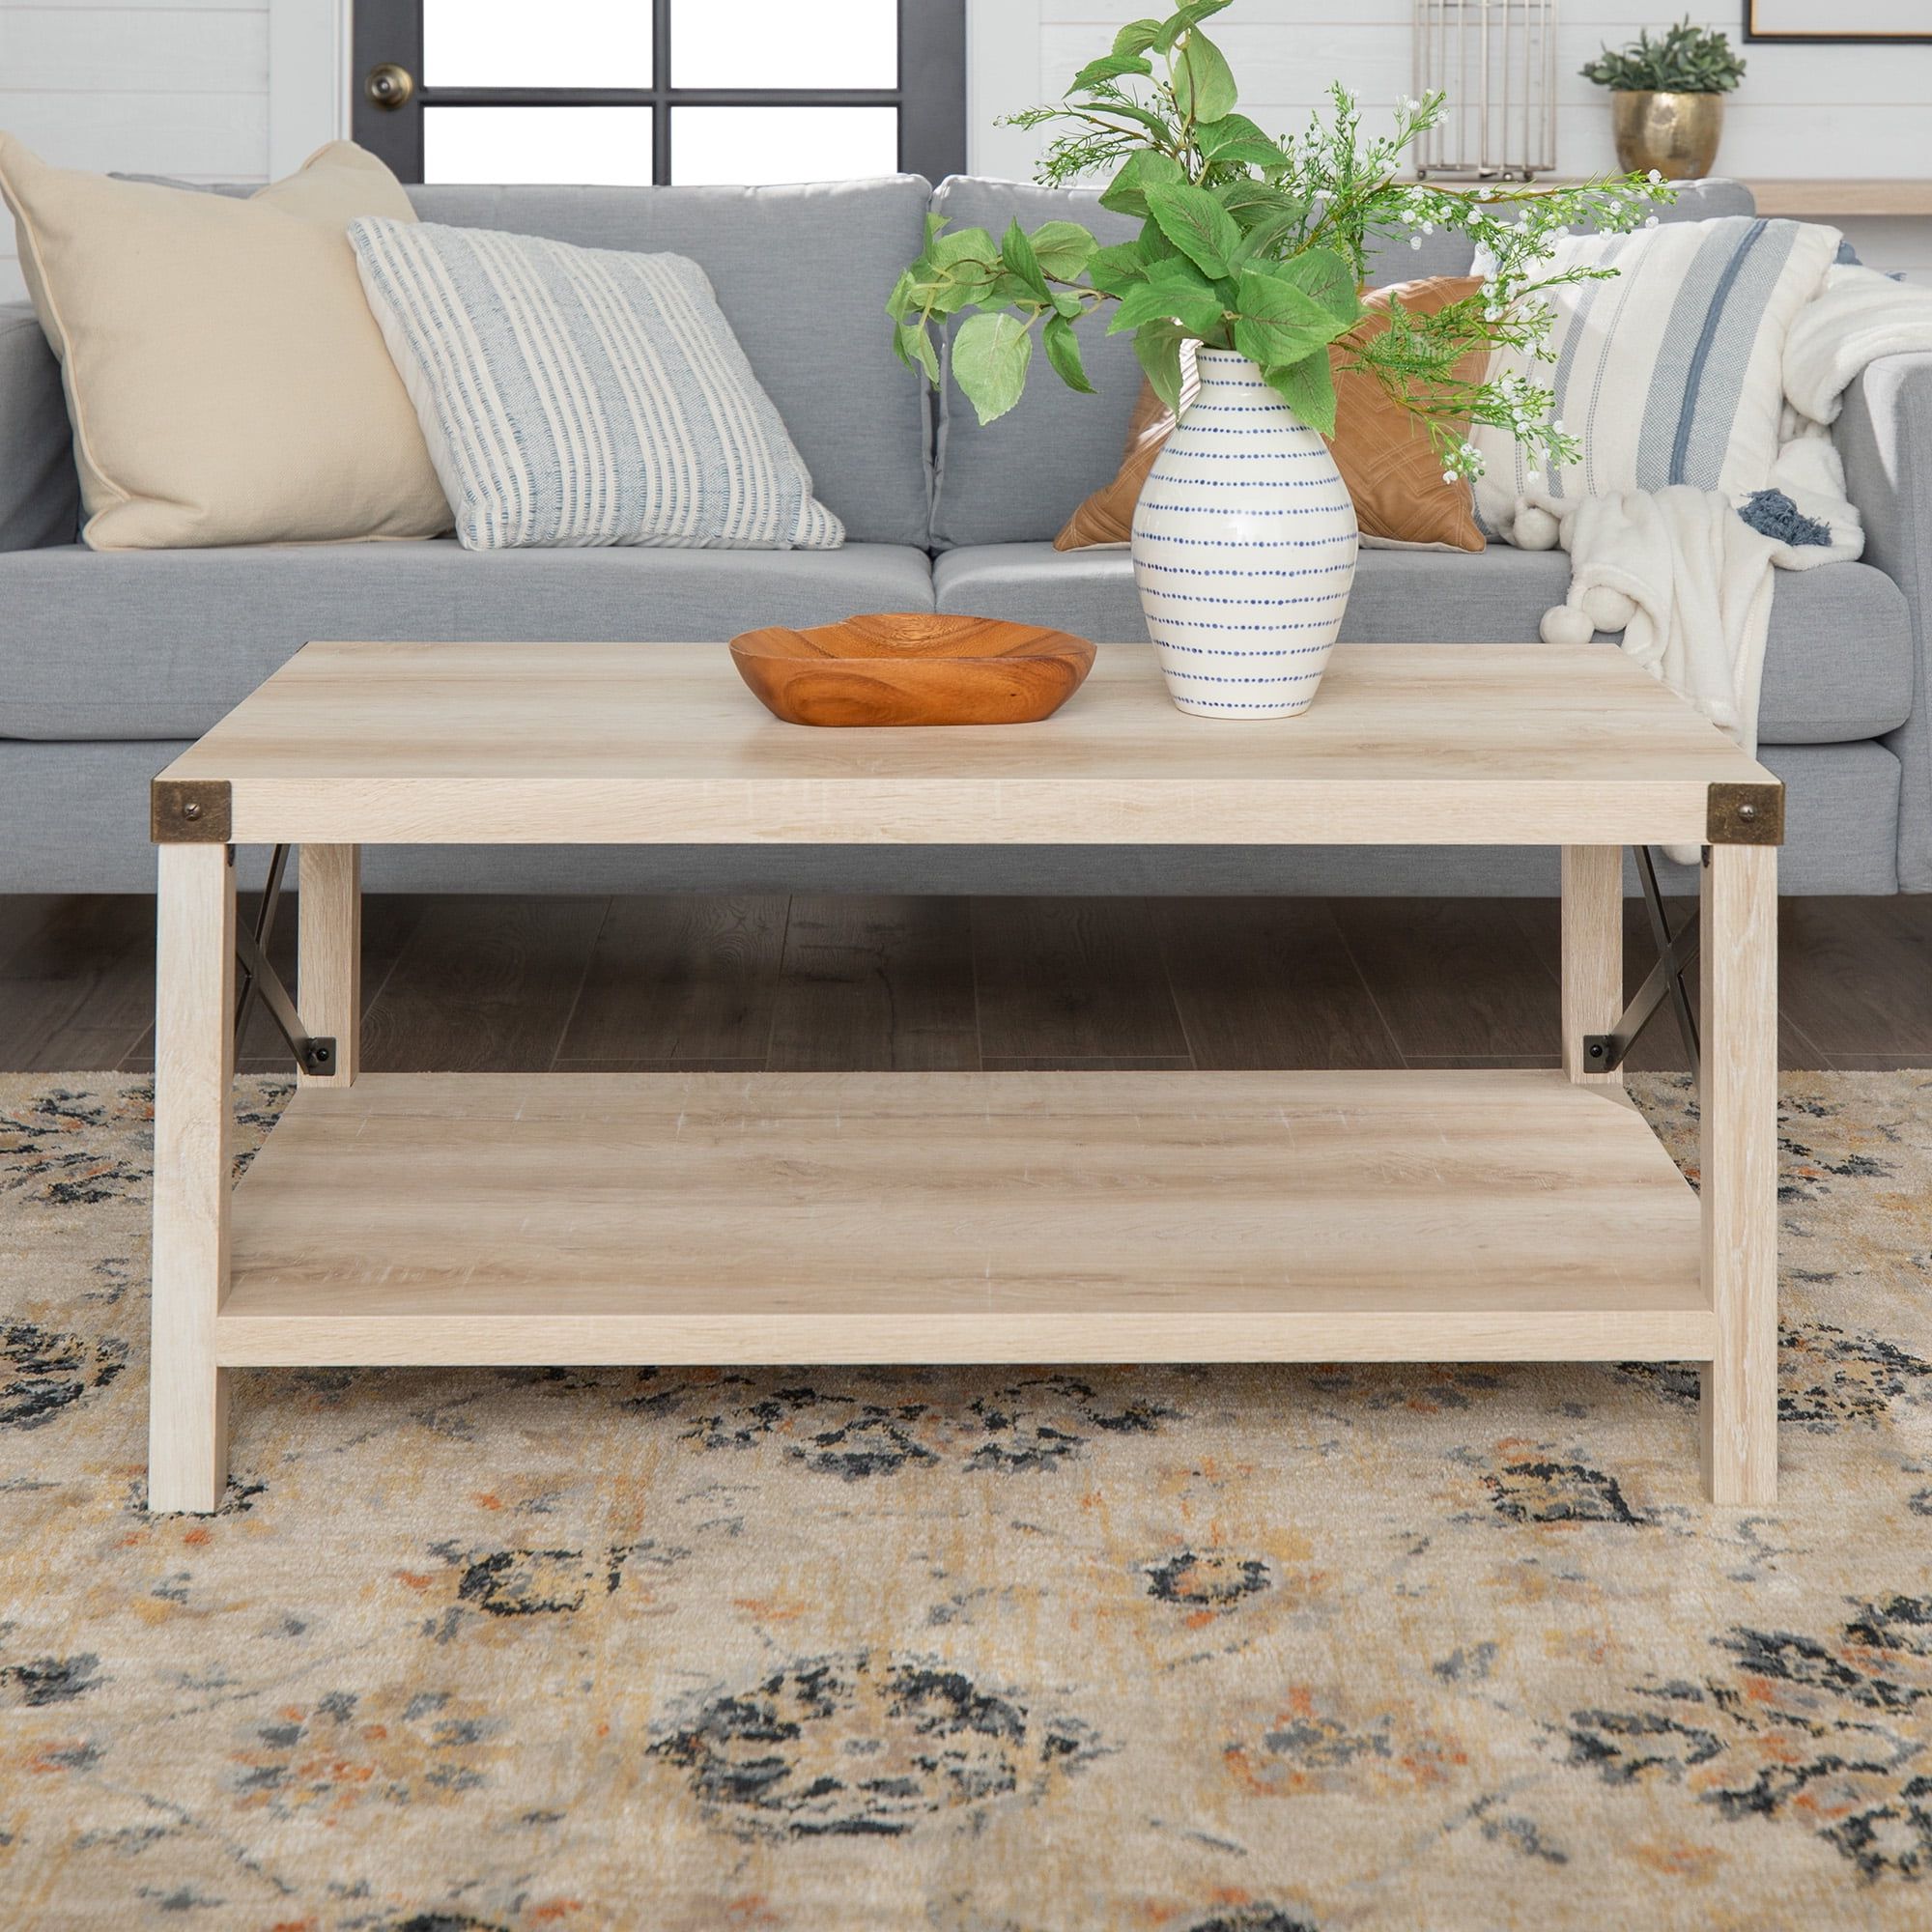 Most Recent Woven Paths Coffee Tables Inside Woven Paths Magnolia Metal X Coffee Table, White Oak – Walmart (Photo 10 of 15)